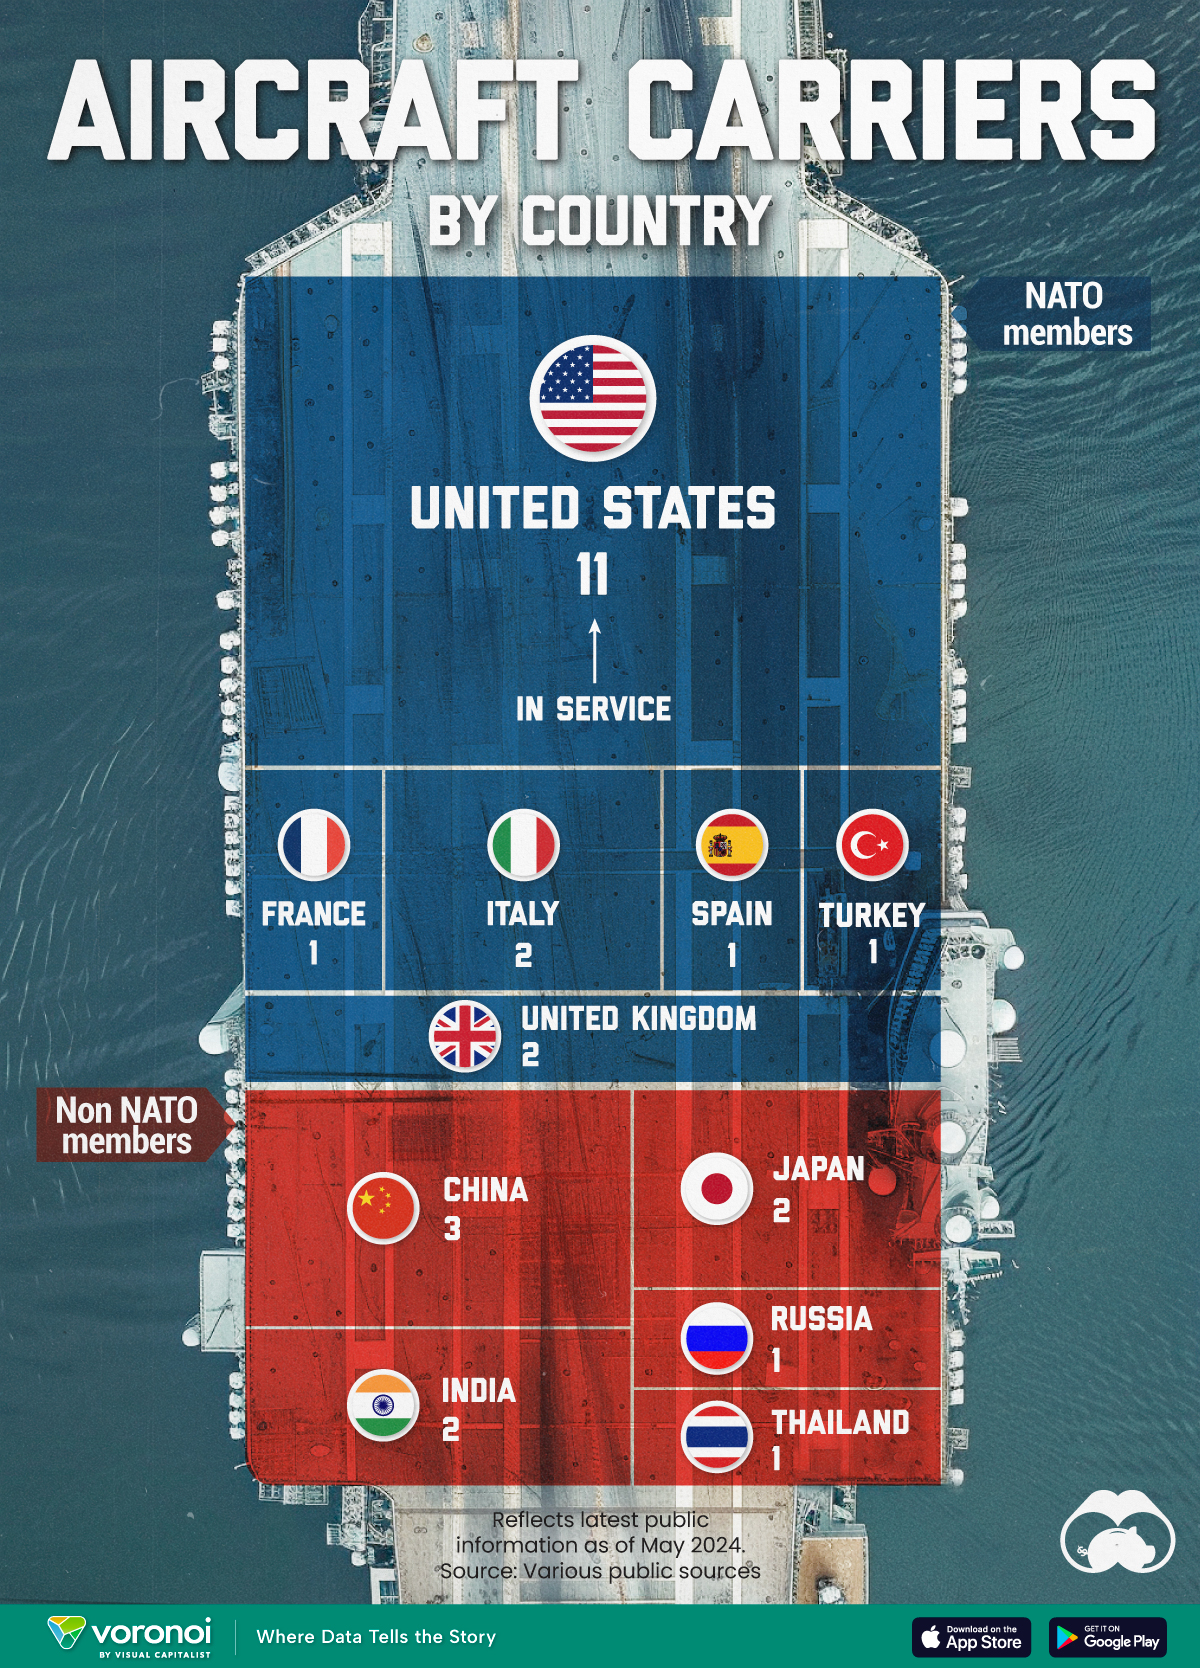 A voronoi graphic showing aircraft carriers by country.